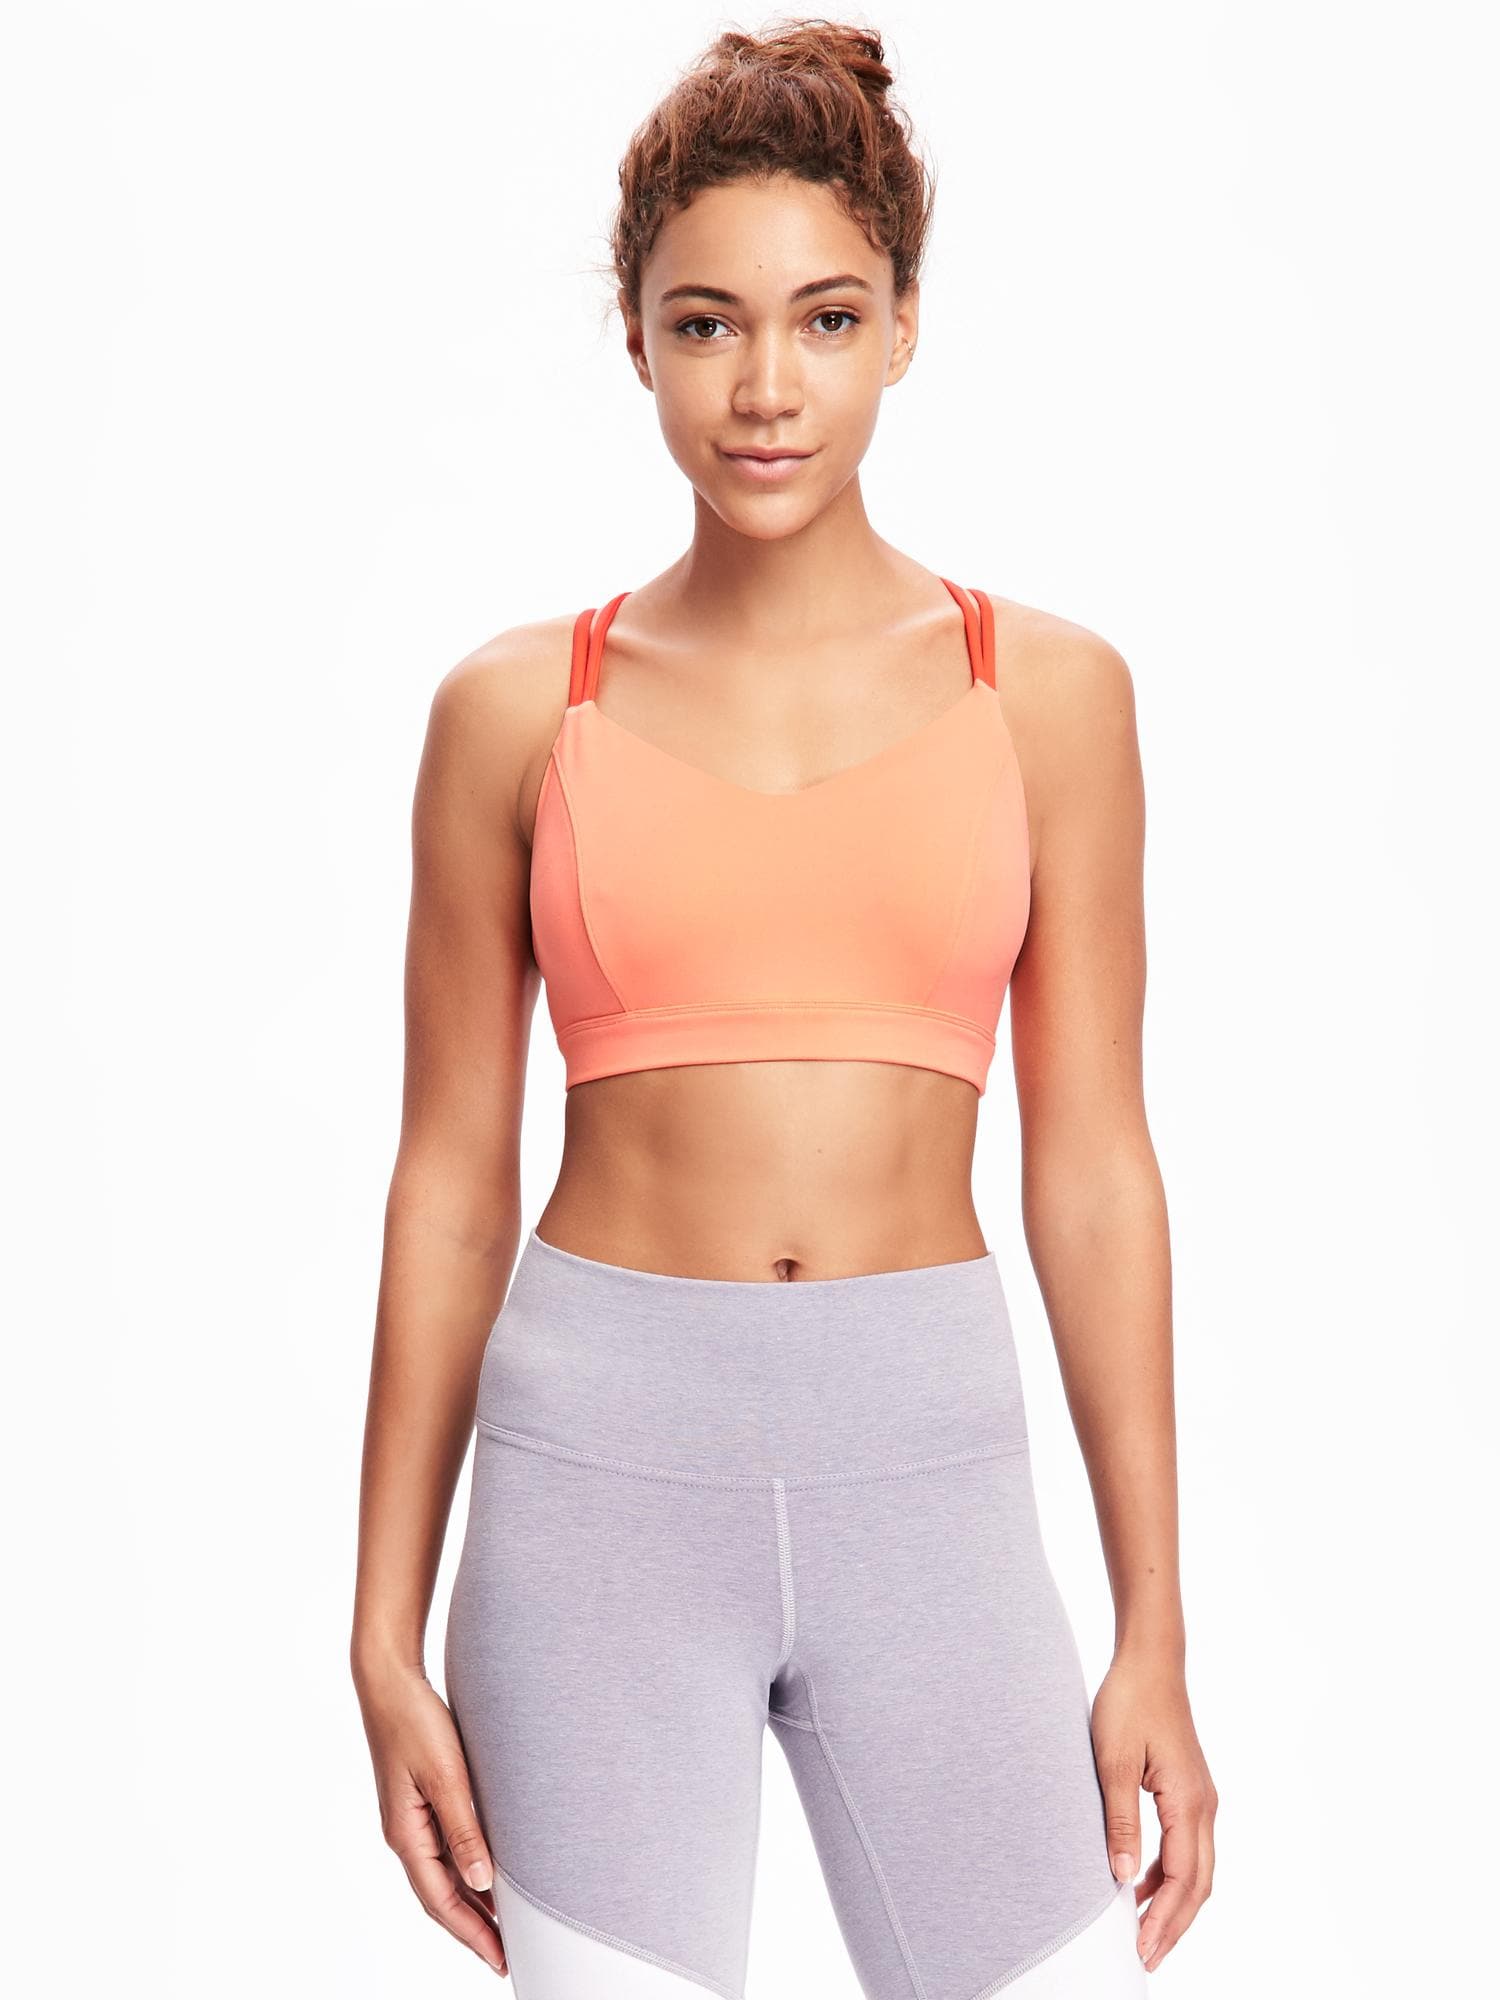 Up To 69% Off on Women's Camisole Sports Bra S